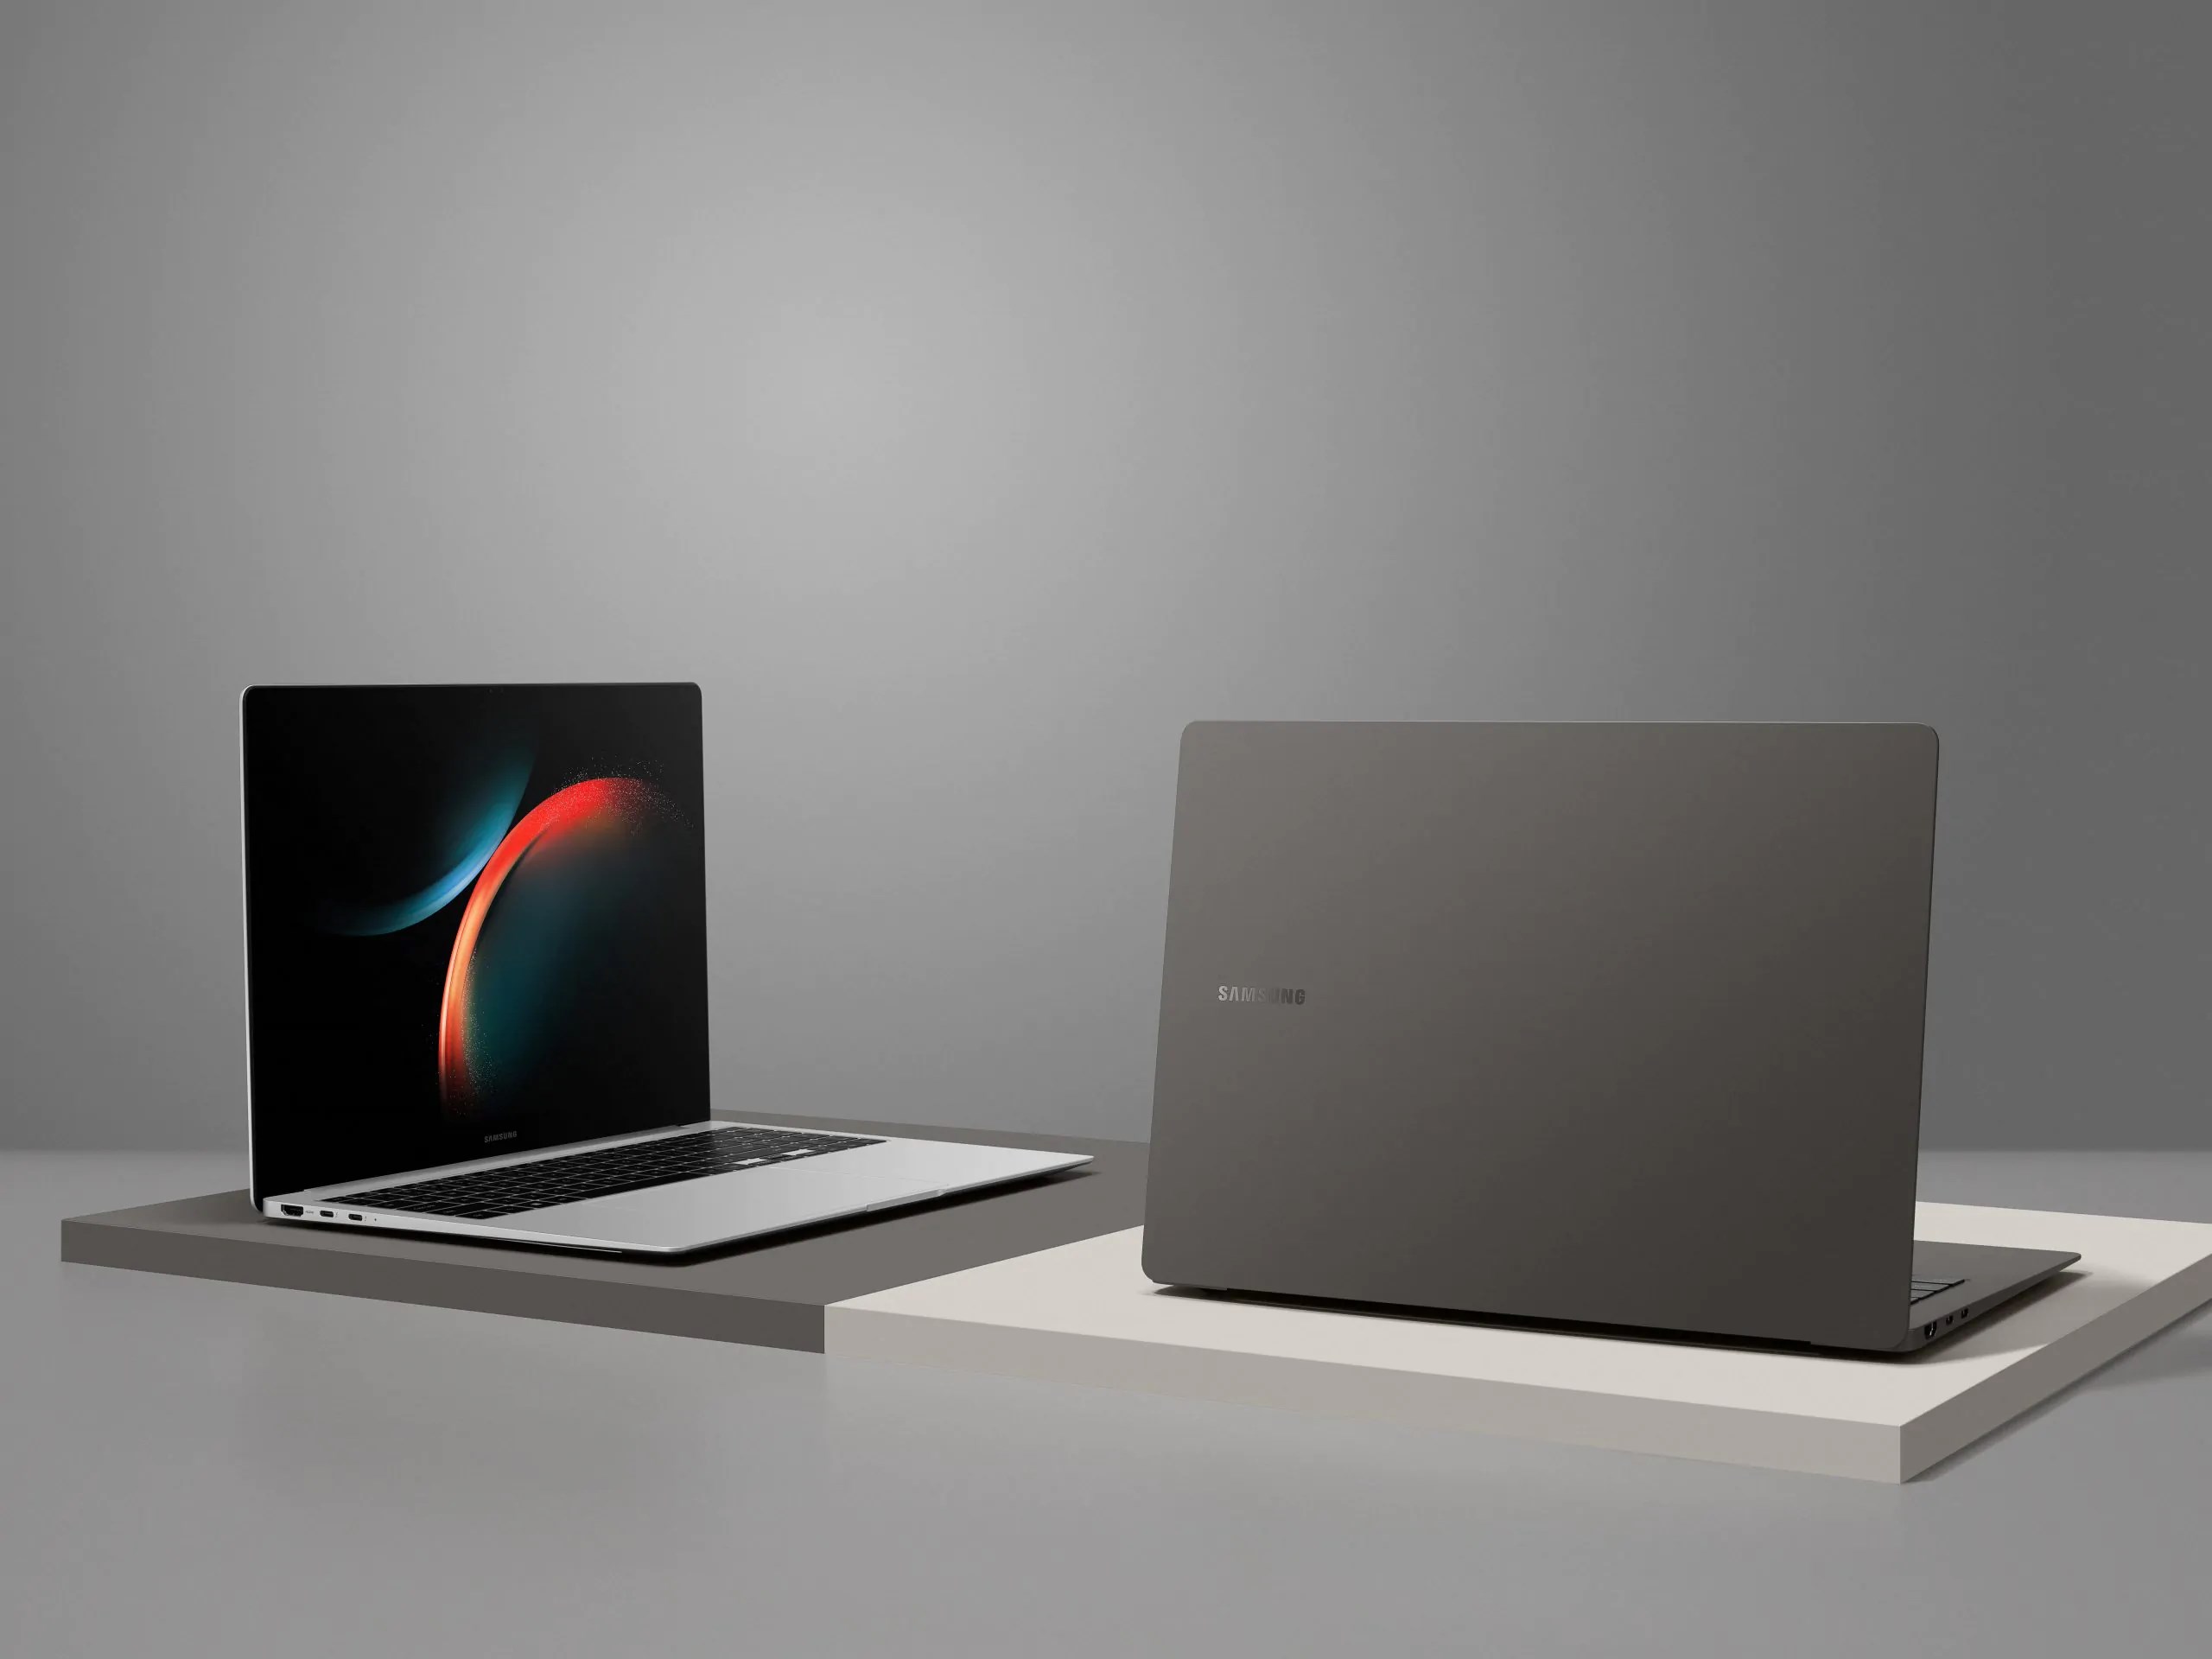 Samsung Galaxy Book 3 was also revealed at the Unpacked 2023 event, and we gathered the specs, price, and release date in this article.